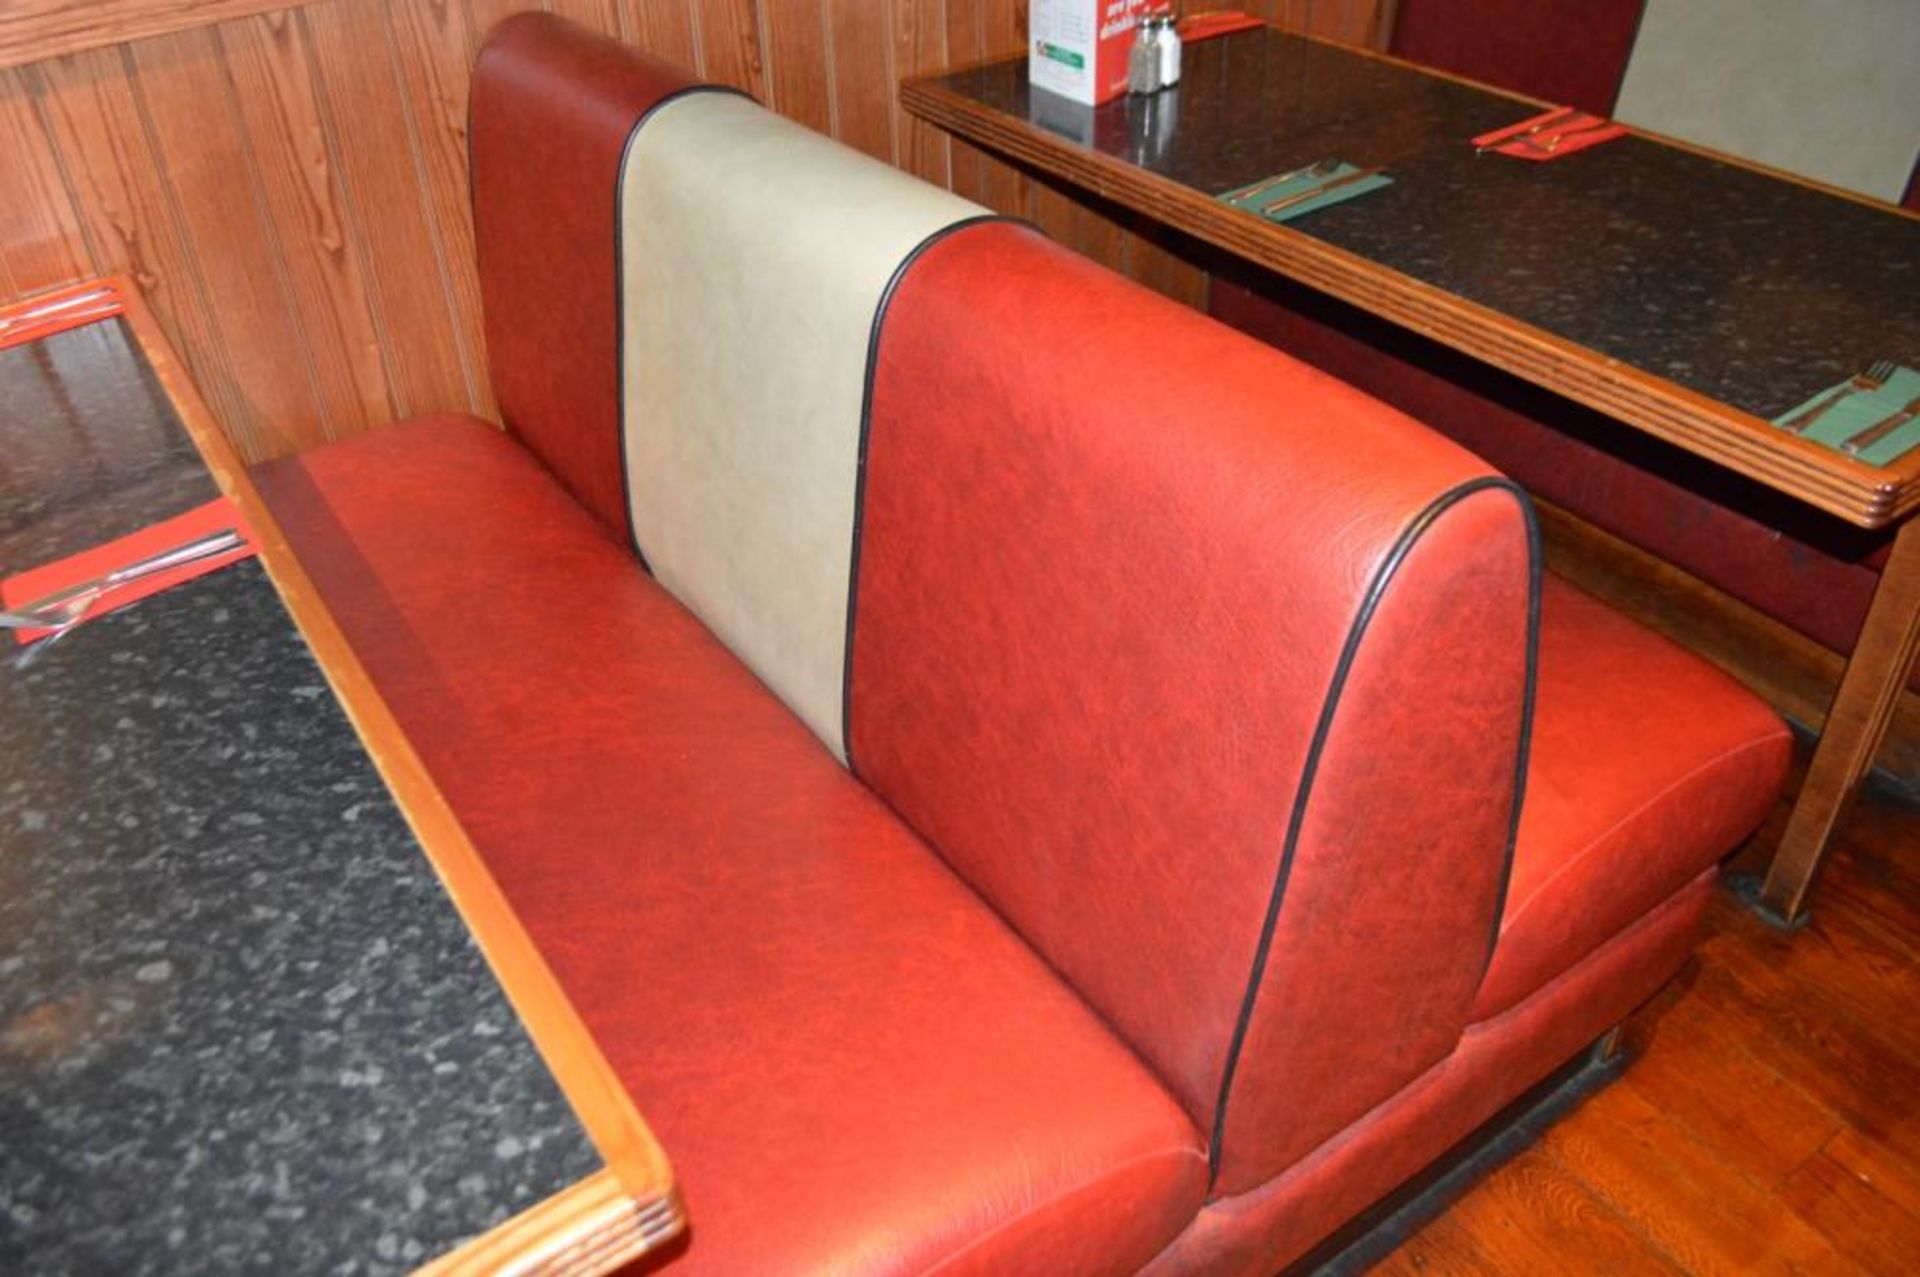 1 x Selection of Cosy Bespoke Seating Booths in a 1950's Retro American Diner Design With Dining Tab - Image 7 of 10